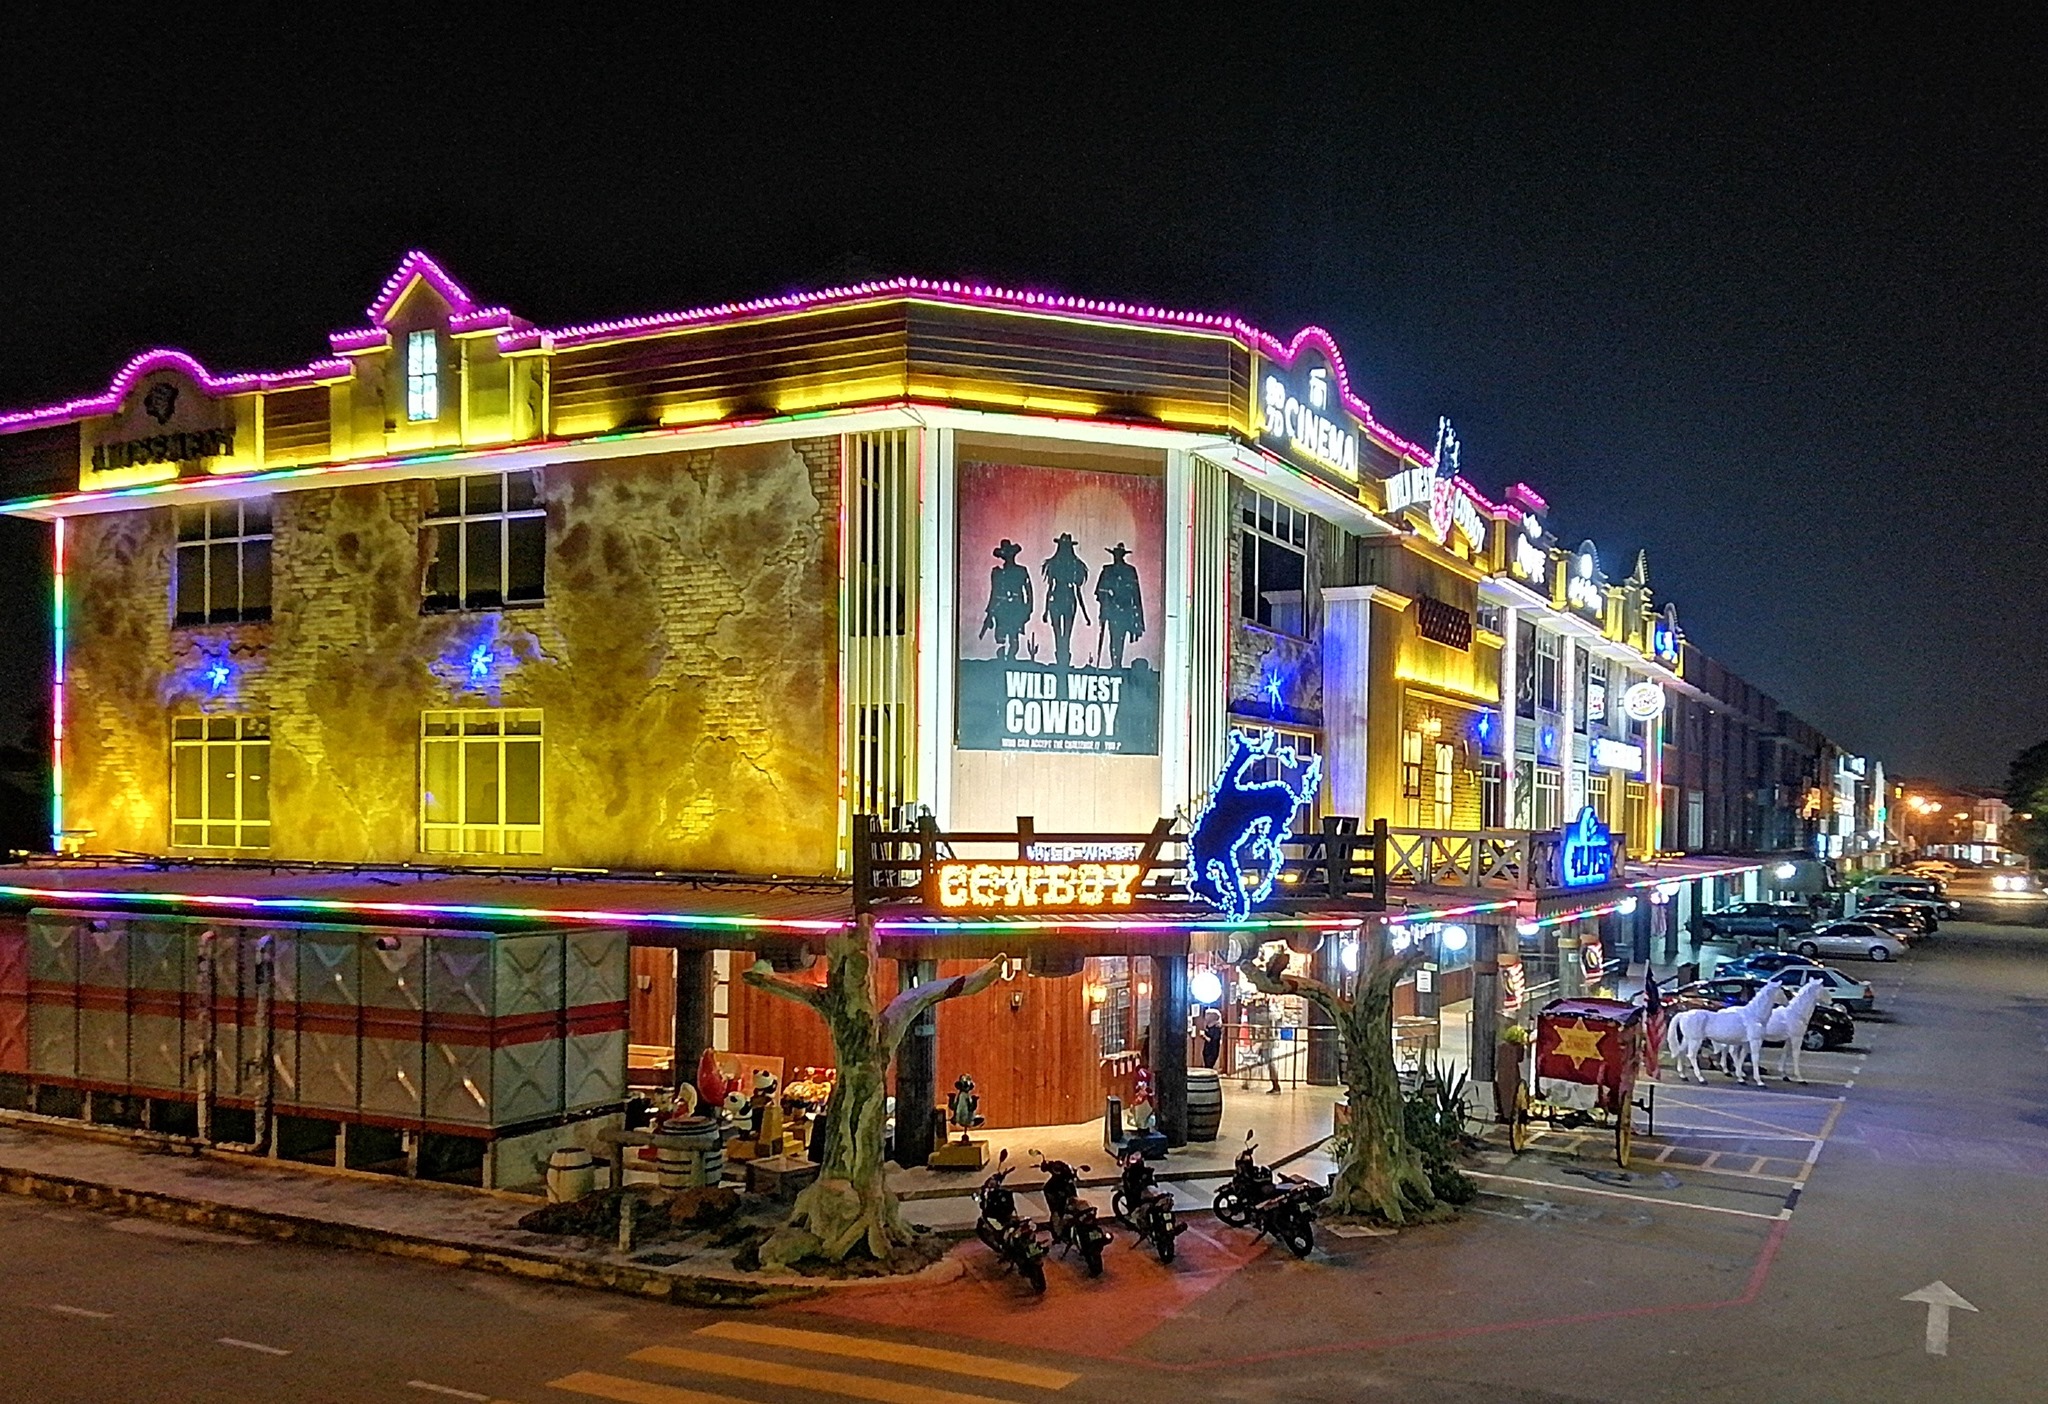 Things to do in Port Dickson - Wild West cowboy